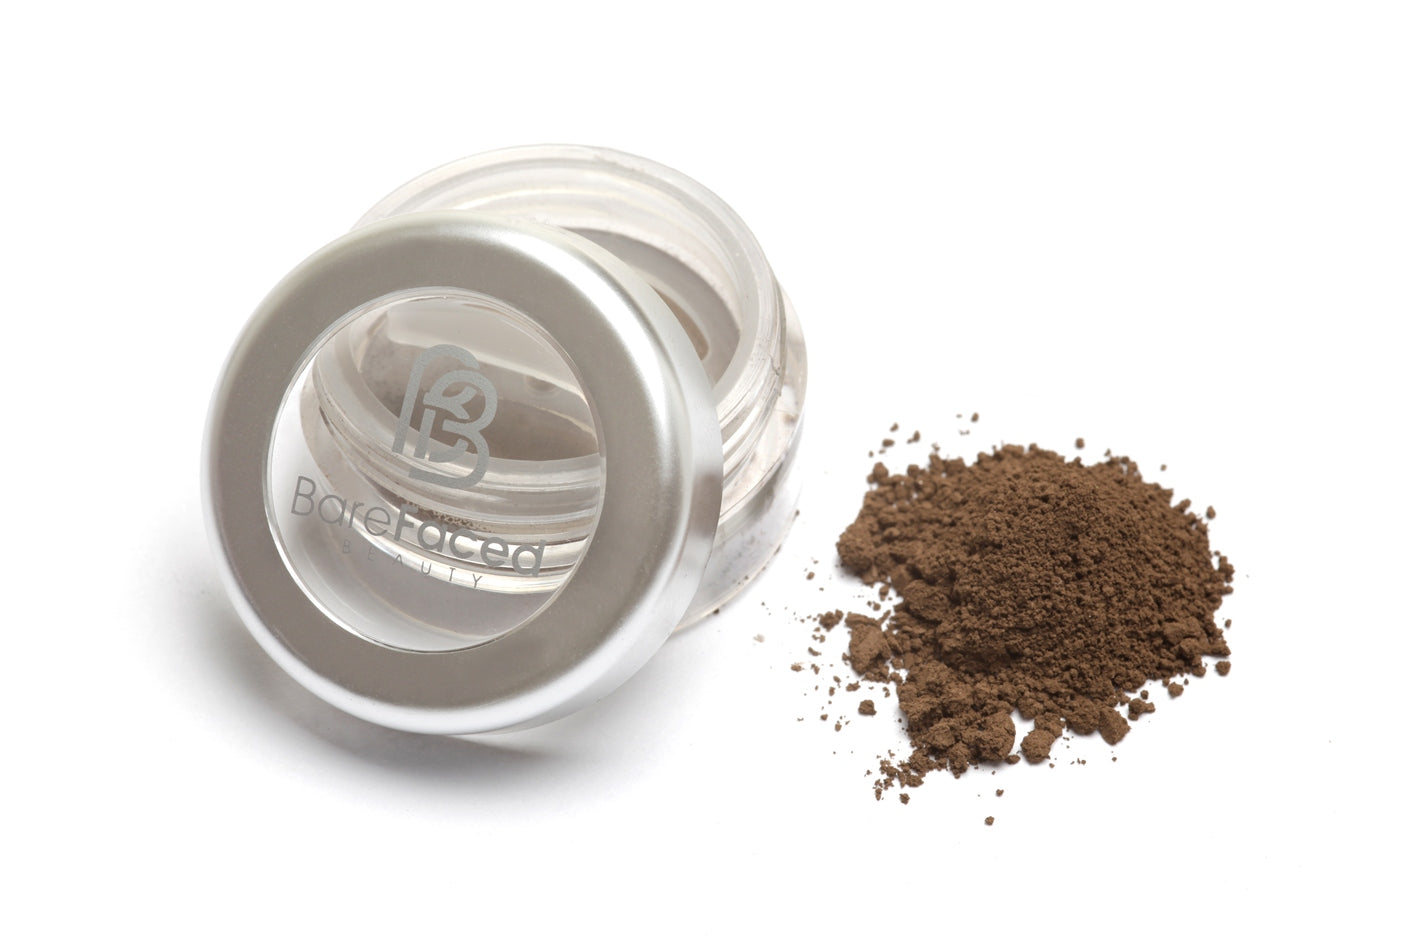 A small round pot of mineral eyeshadow, with a swatch of the powder next to it showing a matt smokey taupe